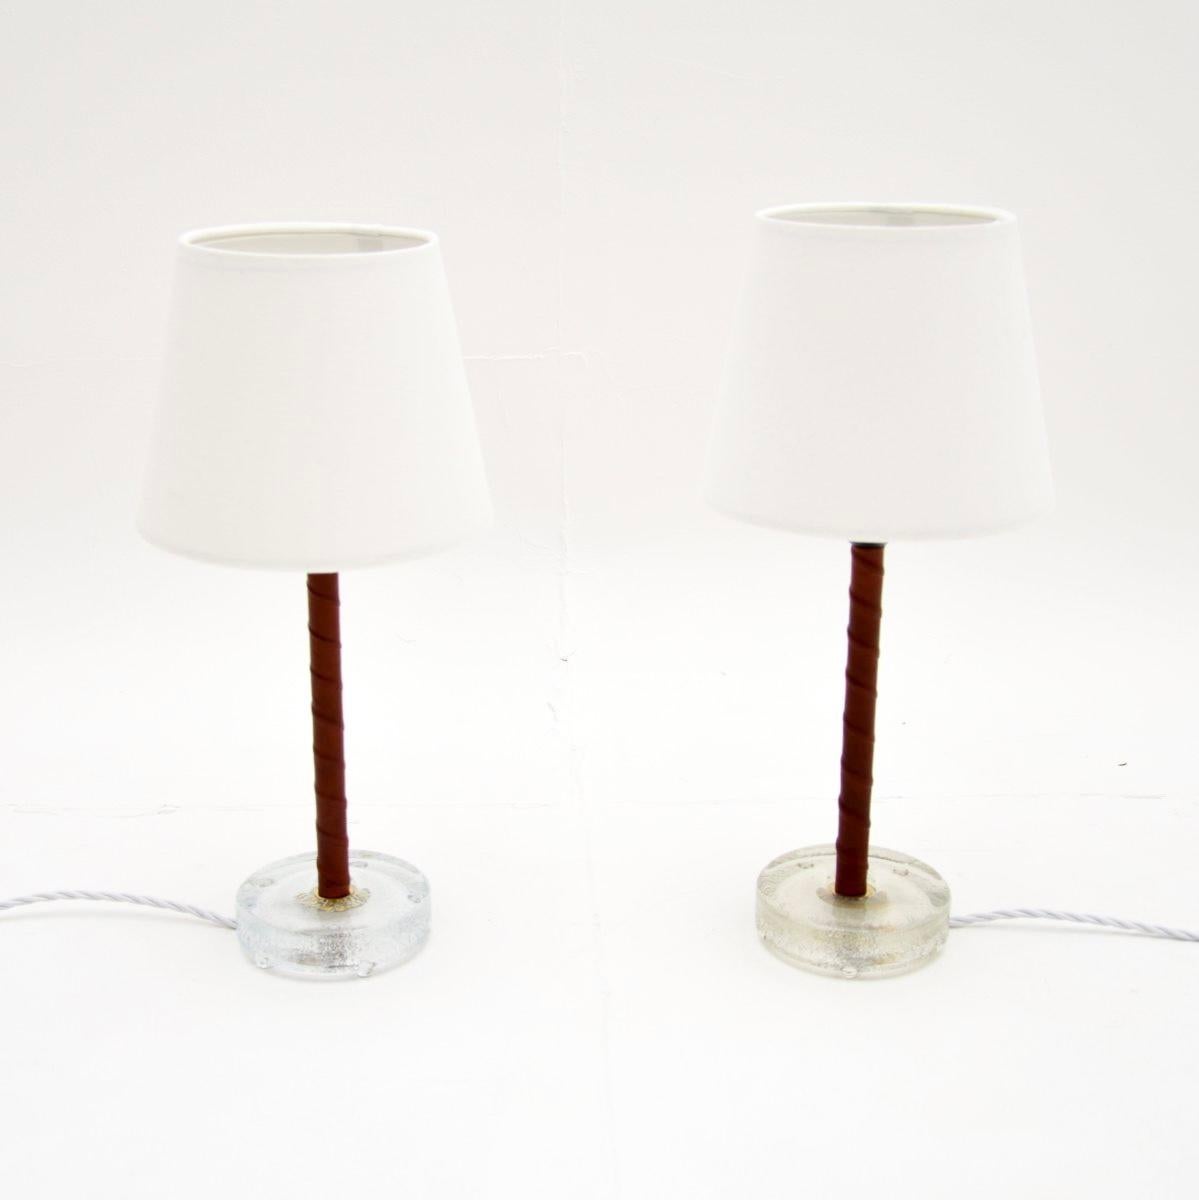 A stylish and extremely well made pair of vintage Swedish leather bound table lamps. They were recently imported from Sweden, they date from the 1970’s.

The quality is outstanding, the metal shafts are beautifully wrapped in twisted brown leather,